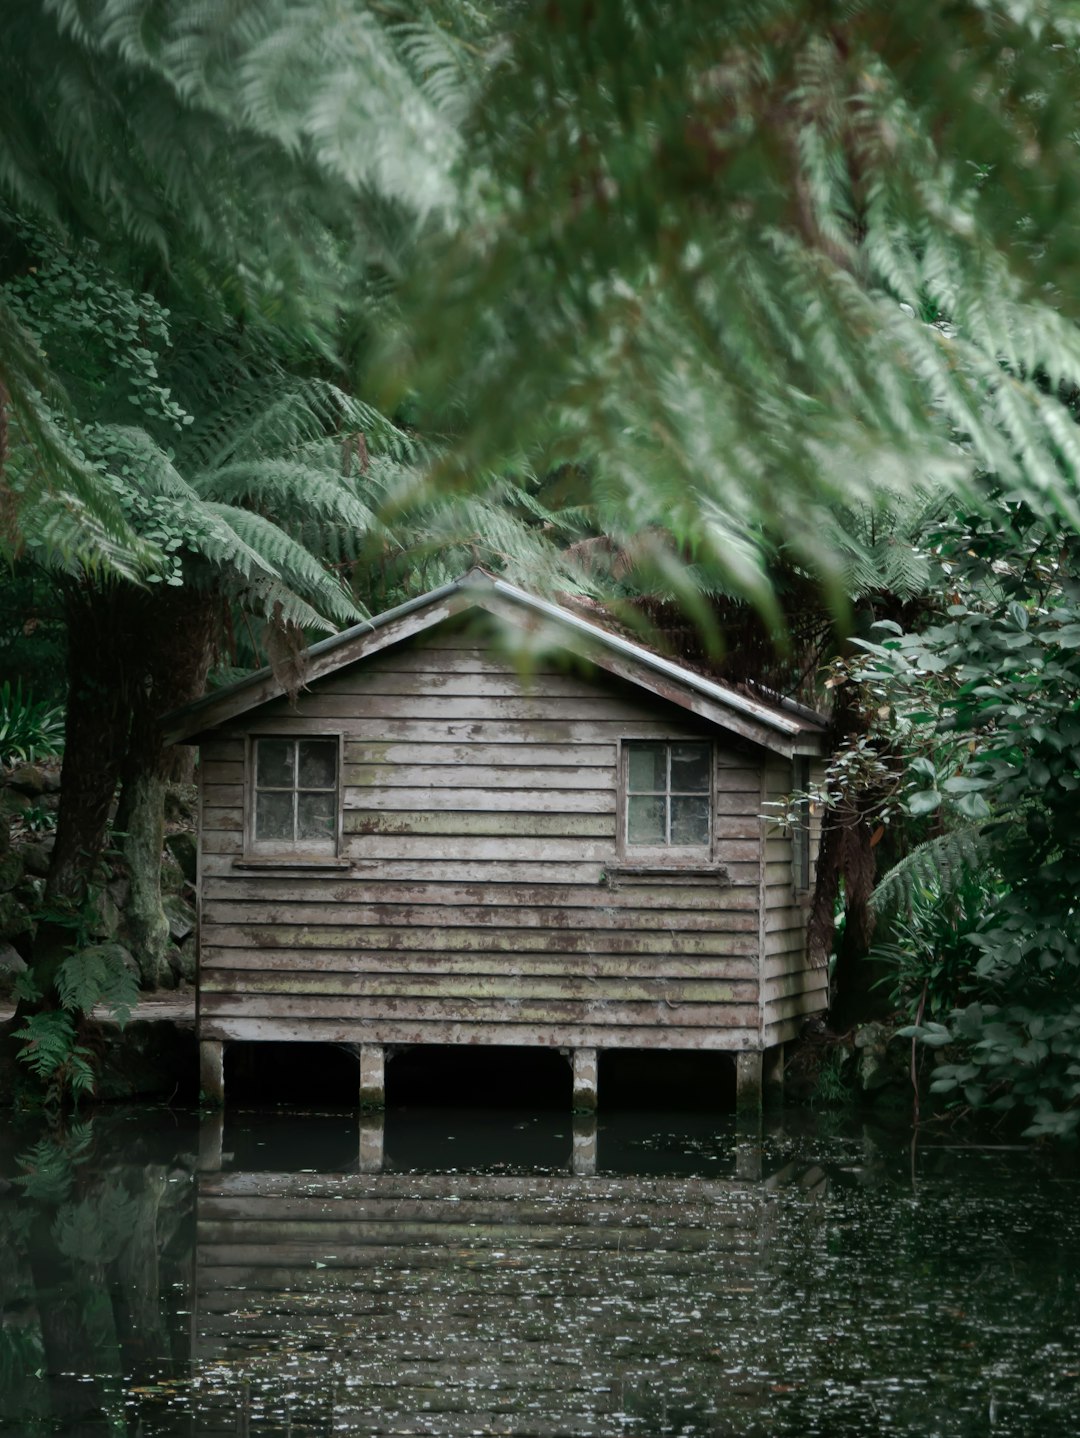 brown wooden house on water